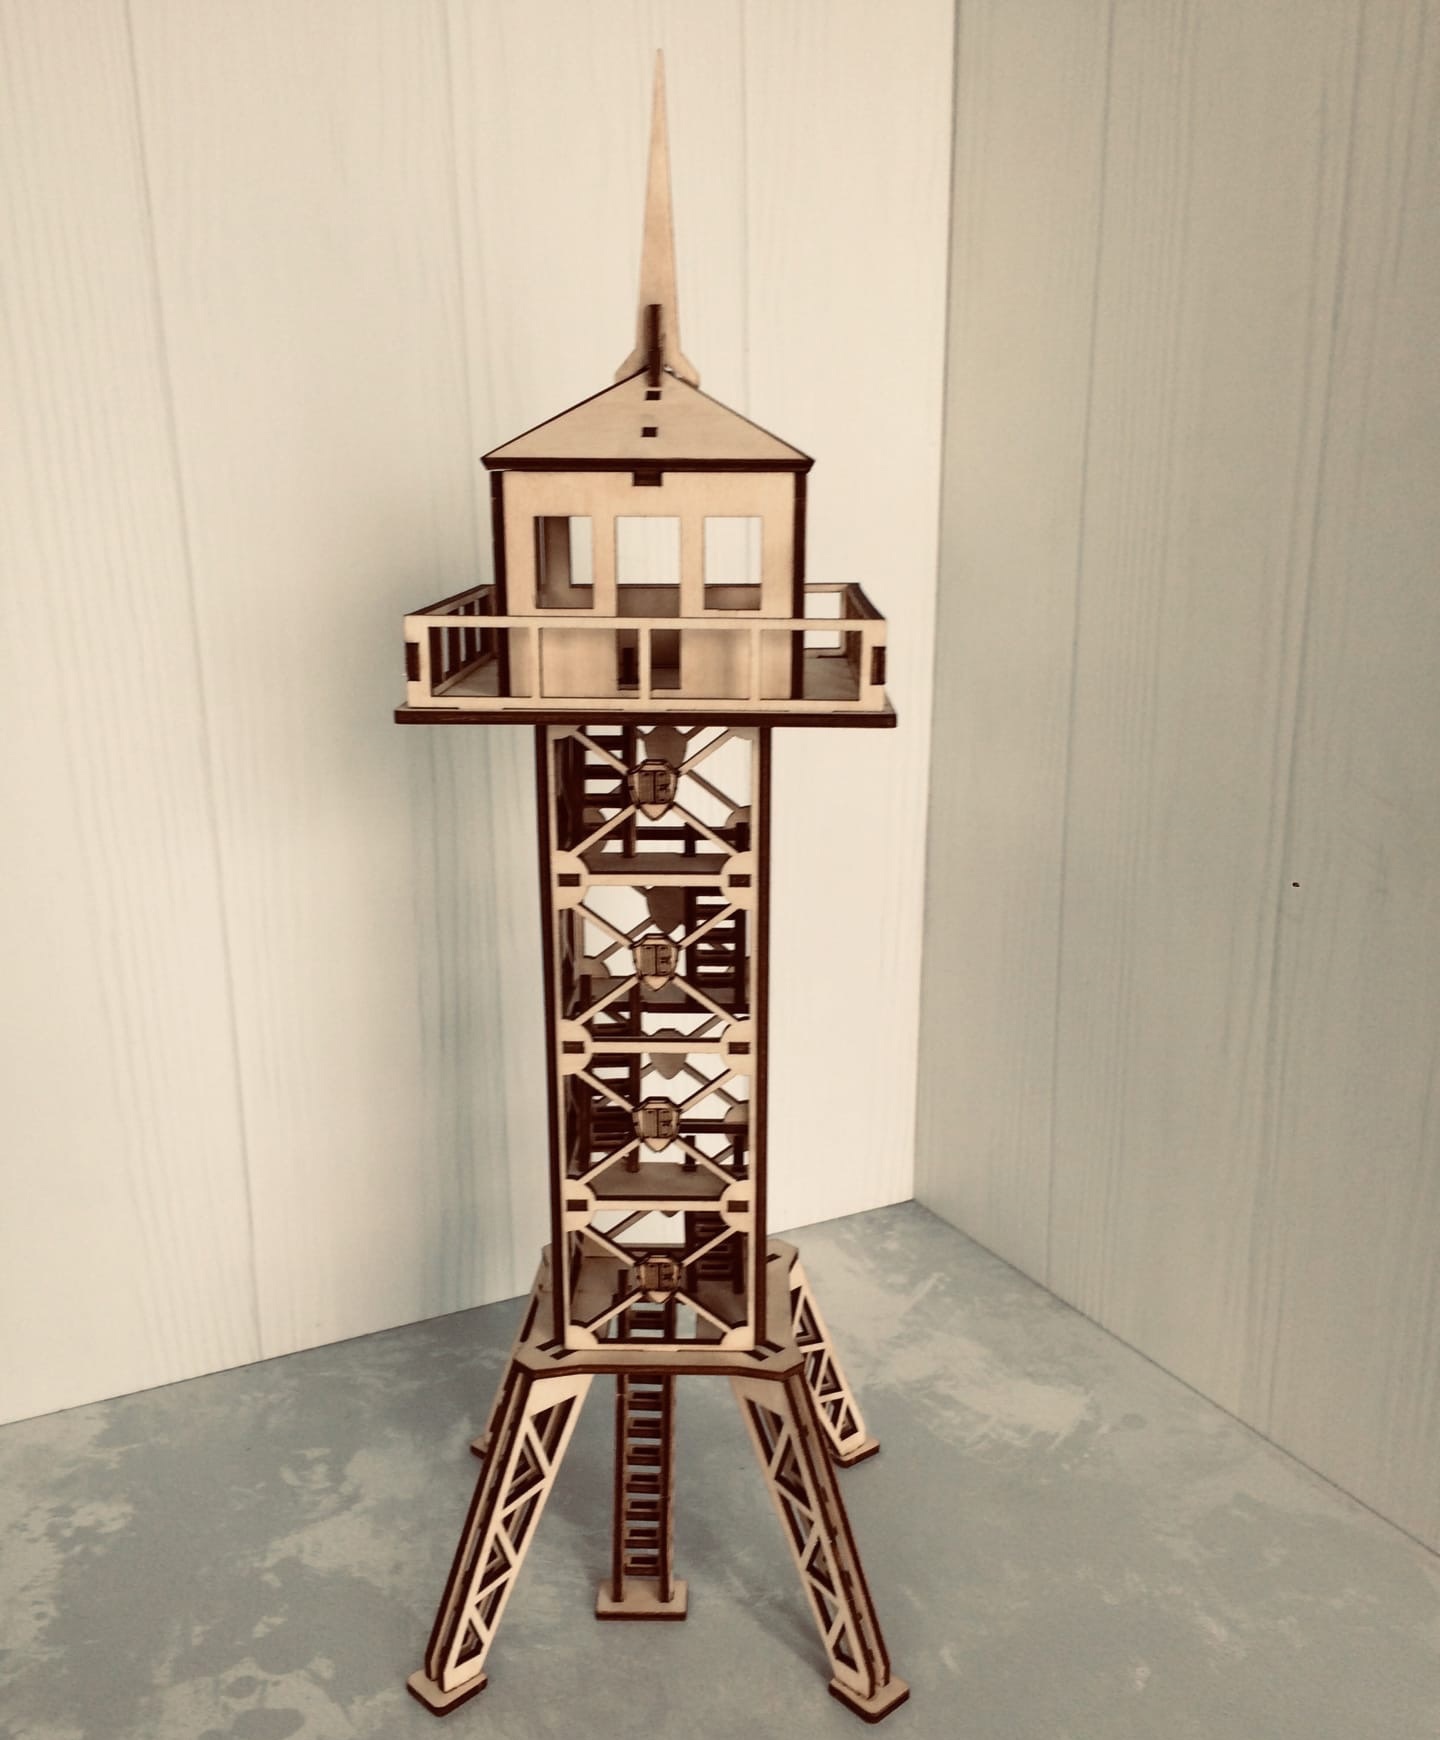 Laser Cut Military Observation Tower 3d Wooden Model  Free Vector